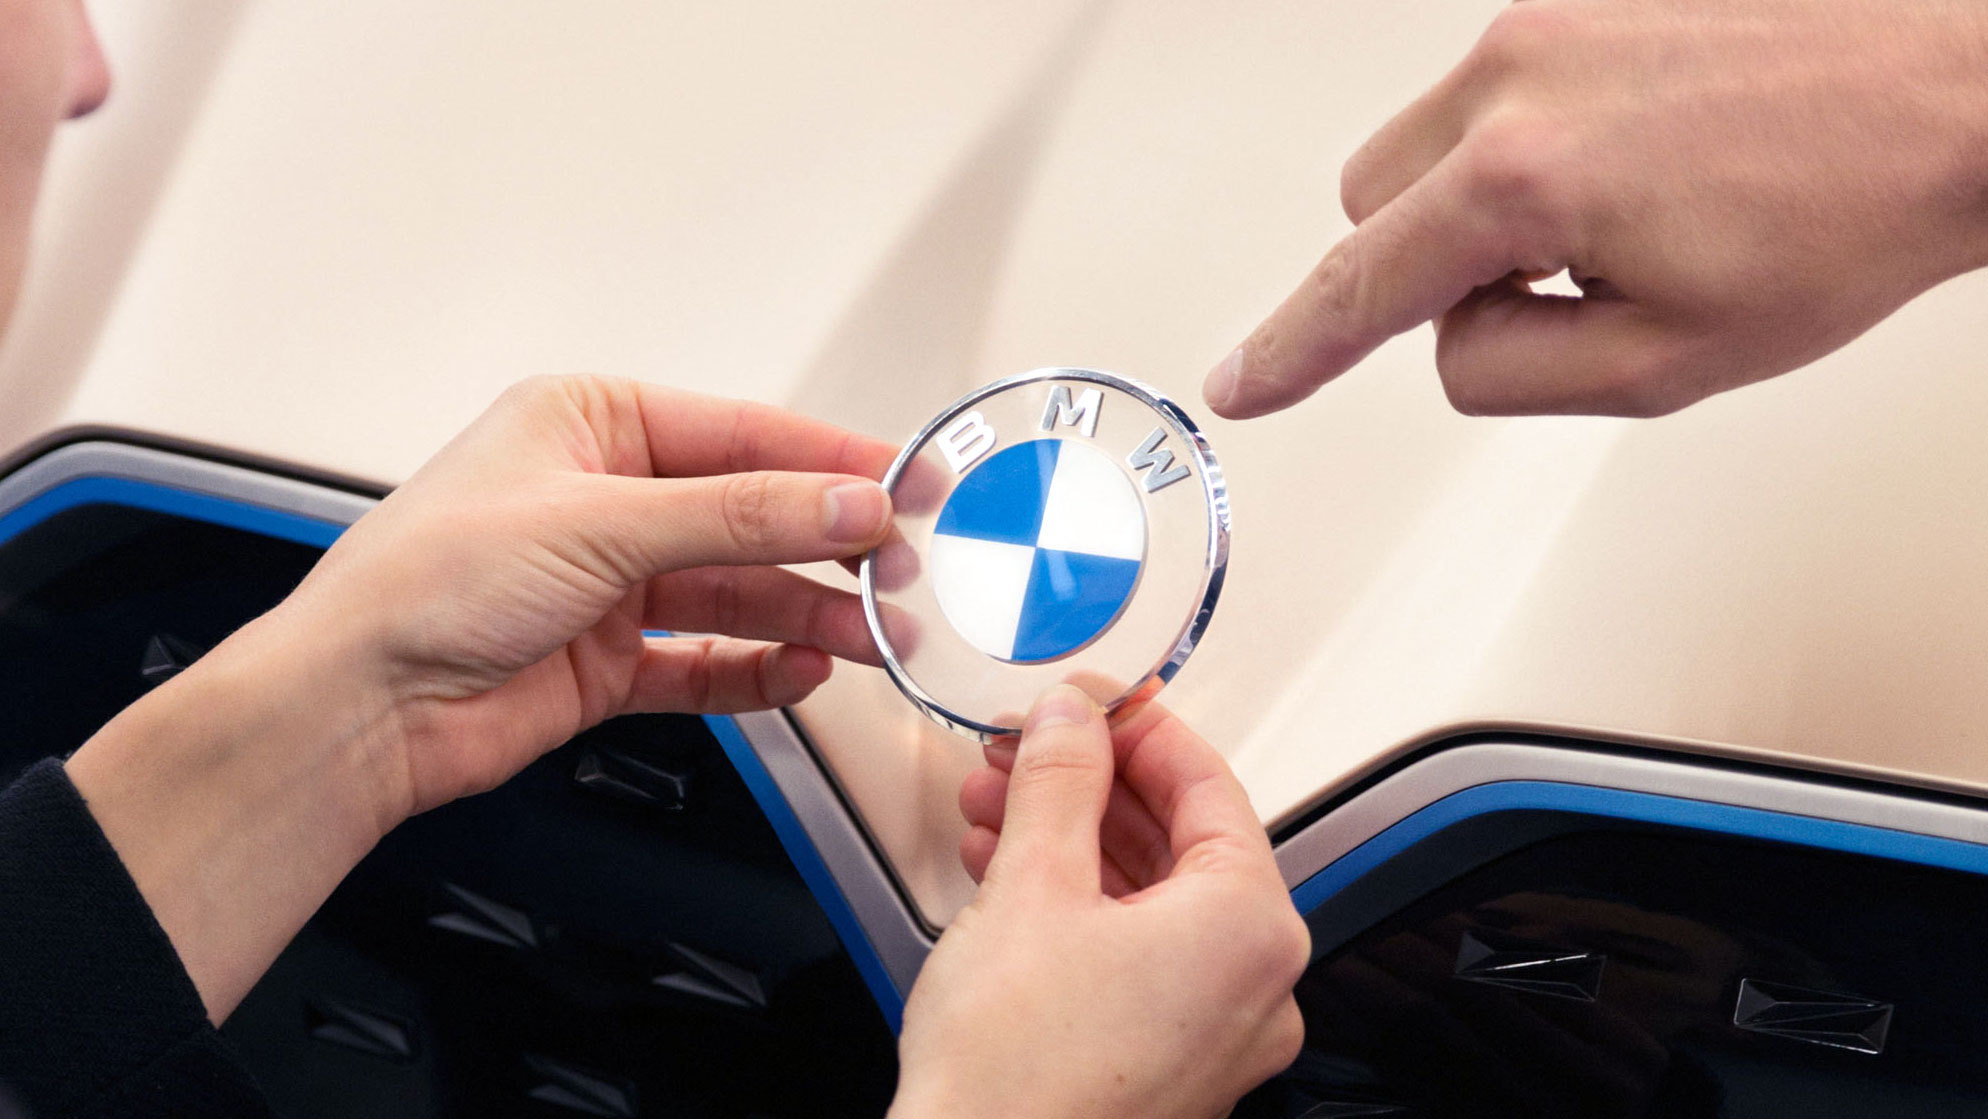 BMW Debuts New Flat Transparent Propeller Badge With The Concept